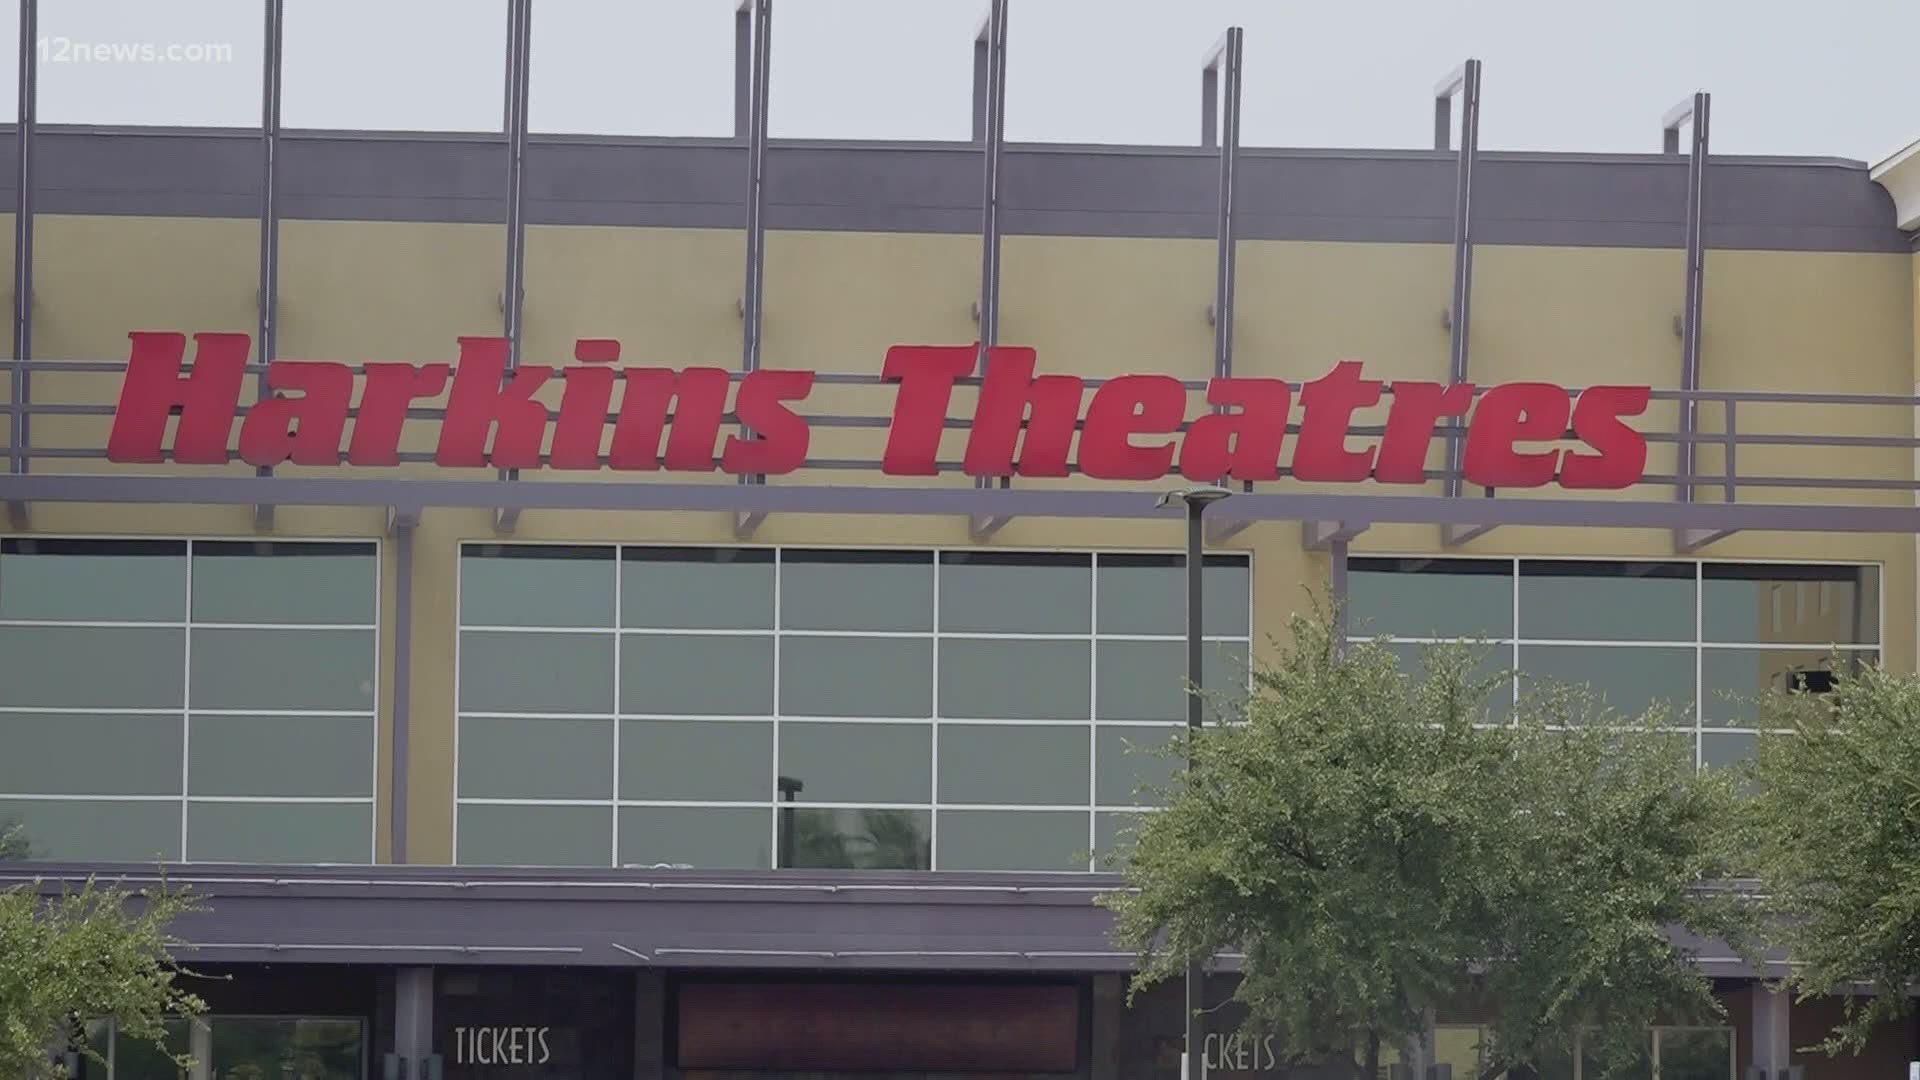 Harkins Theatres is reopening movie theaters across Arizona on Friday. They have procedures in place to keep patrons safe, but will there be an increase in cases?